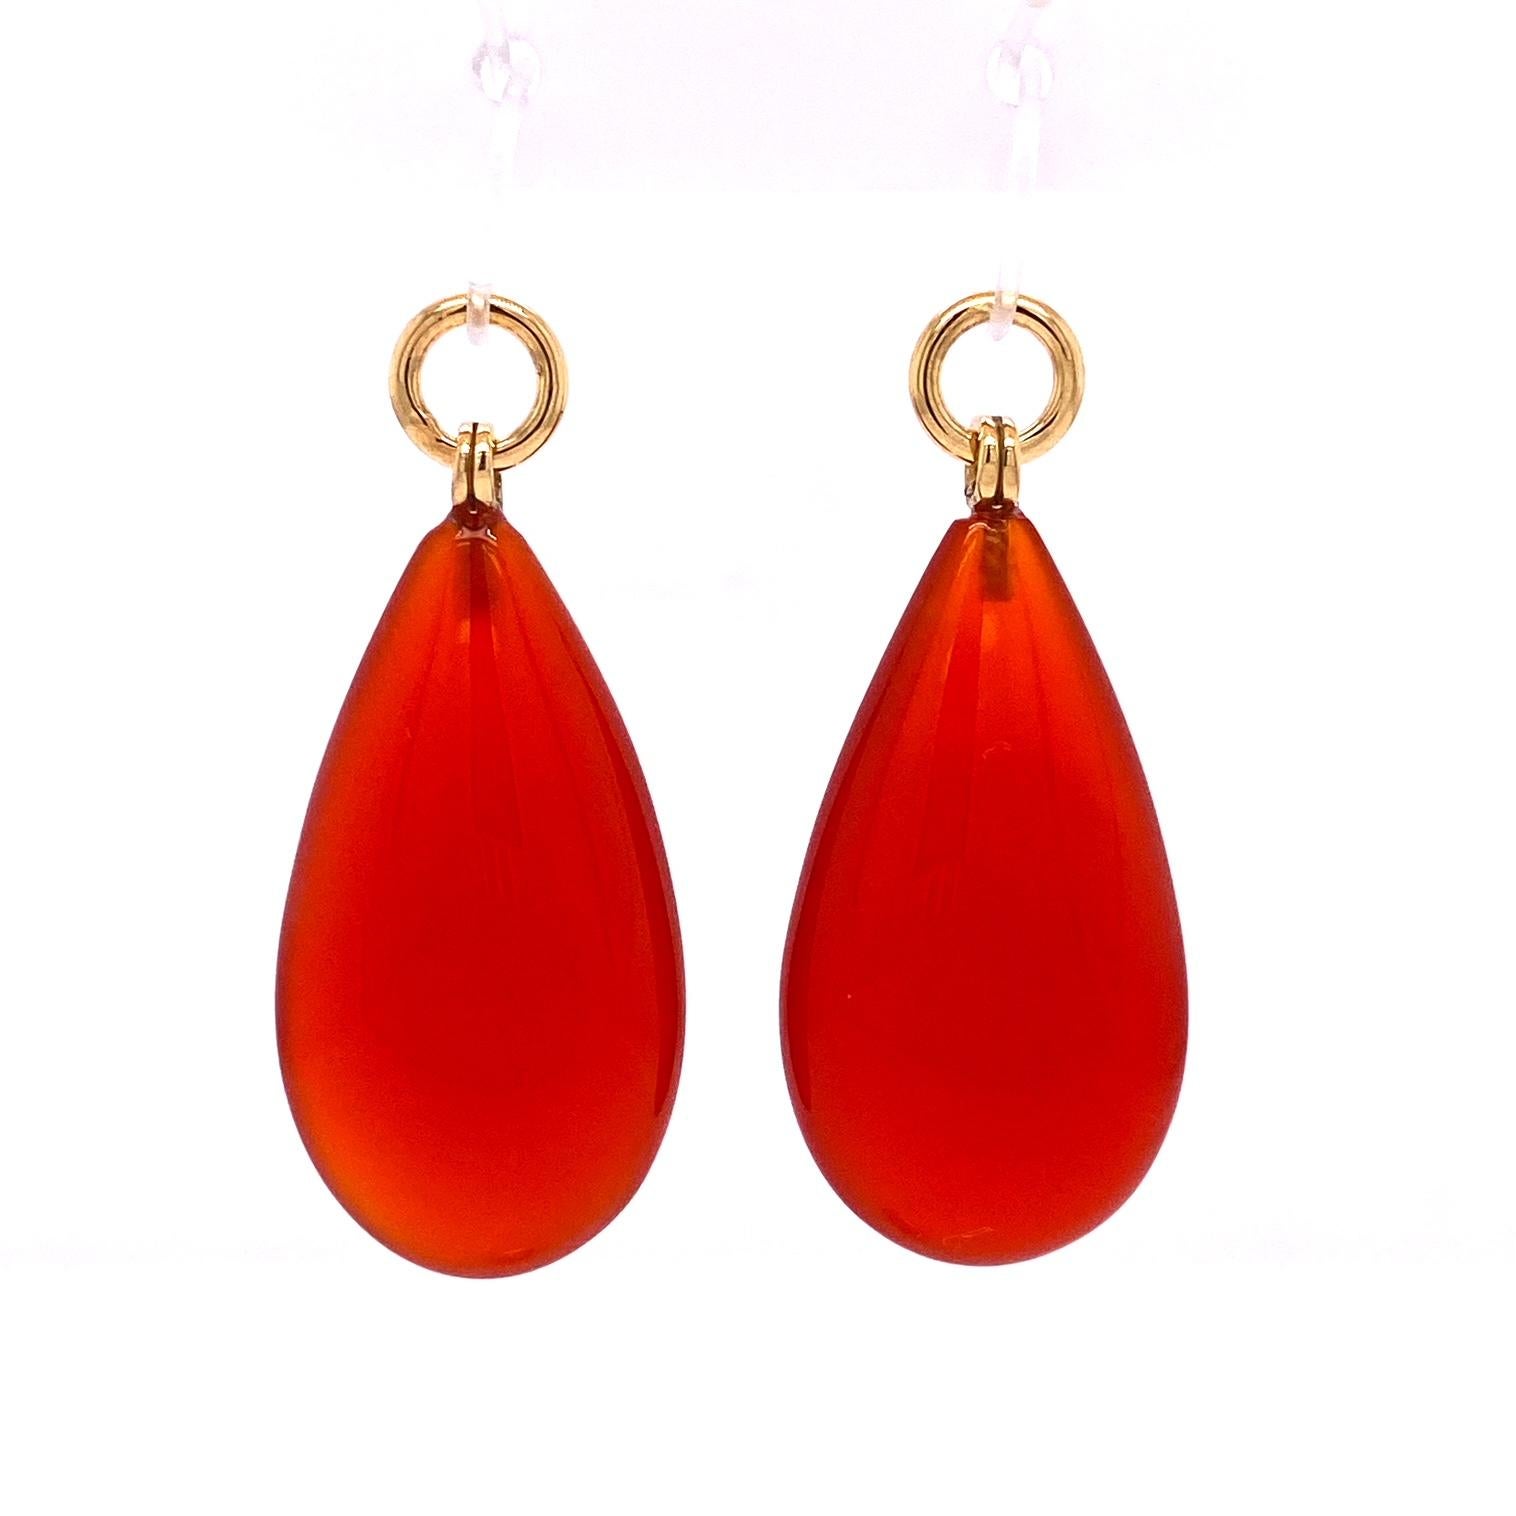 Contemporary 18 Karat Gold Diamond Hoops with Champagne Diamond Circles and Carnelian Jackets